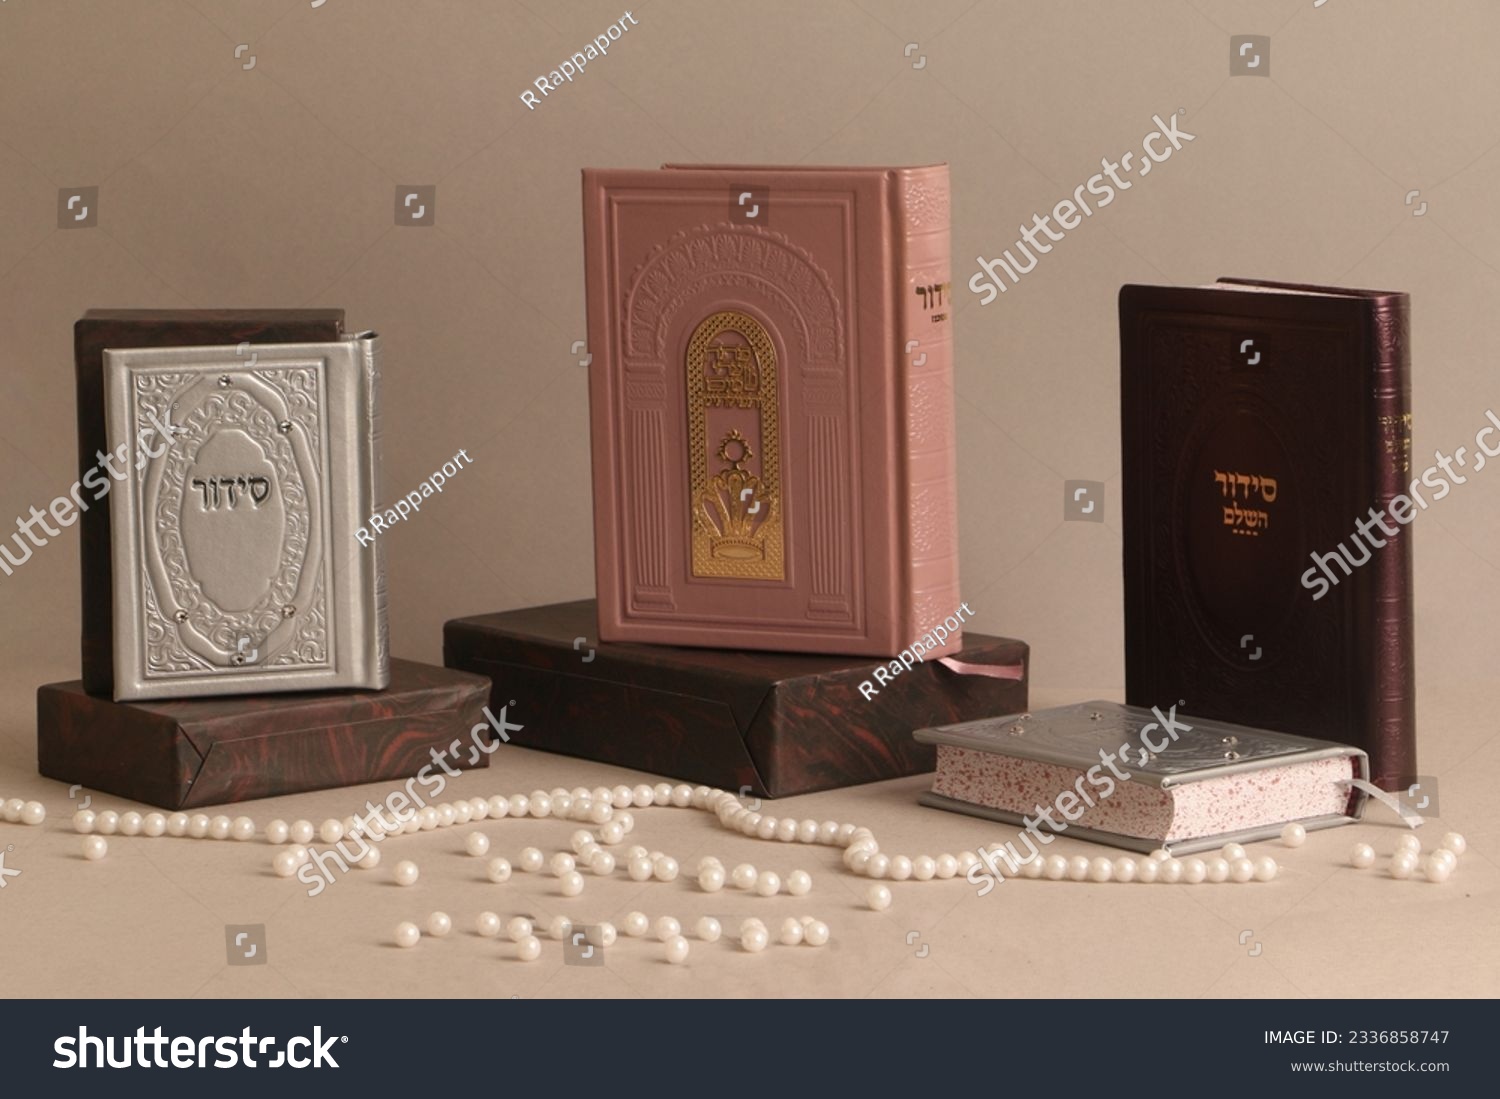 jewish Prayer books. On the pink book it is written: "Open the gates of heaven to our prayers", on the other books is written "Siddur" #2336858747